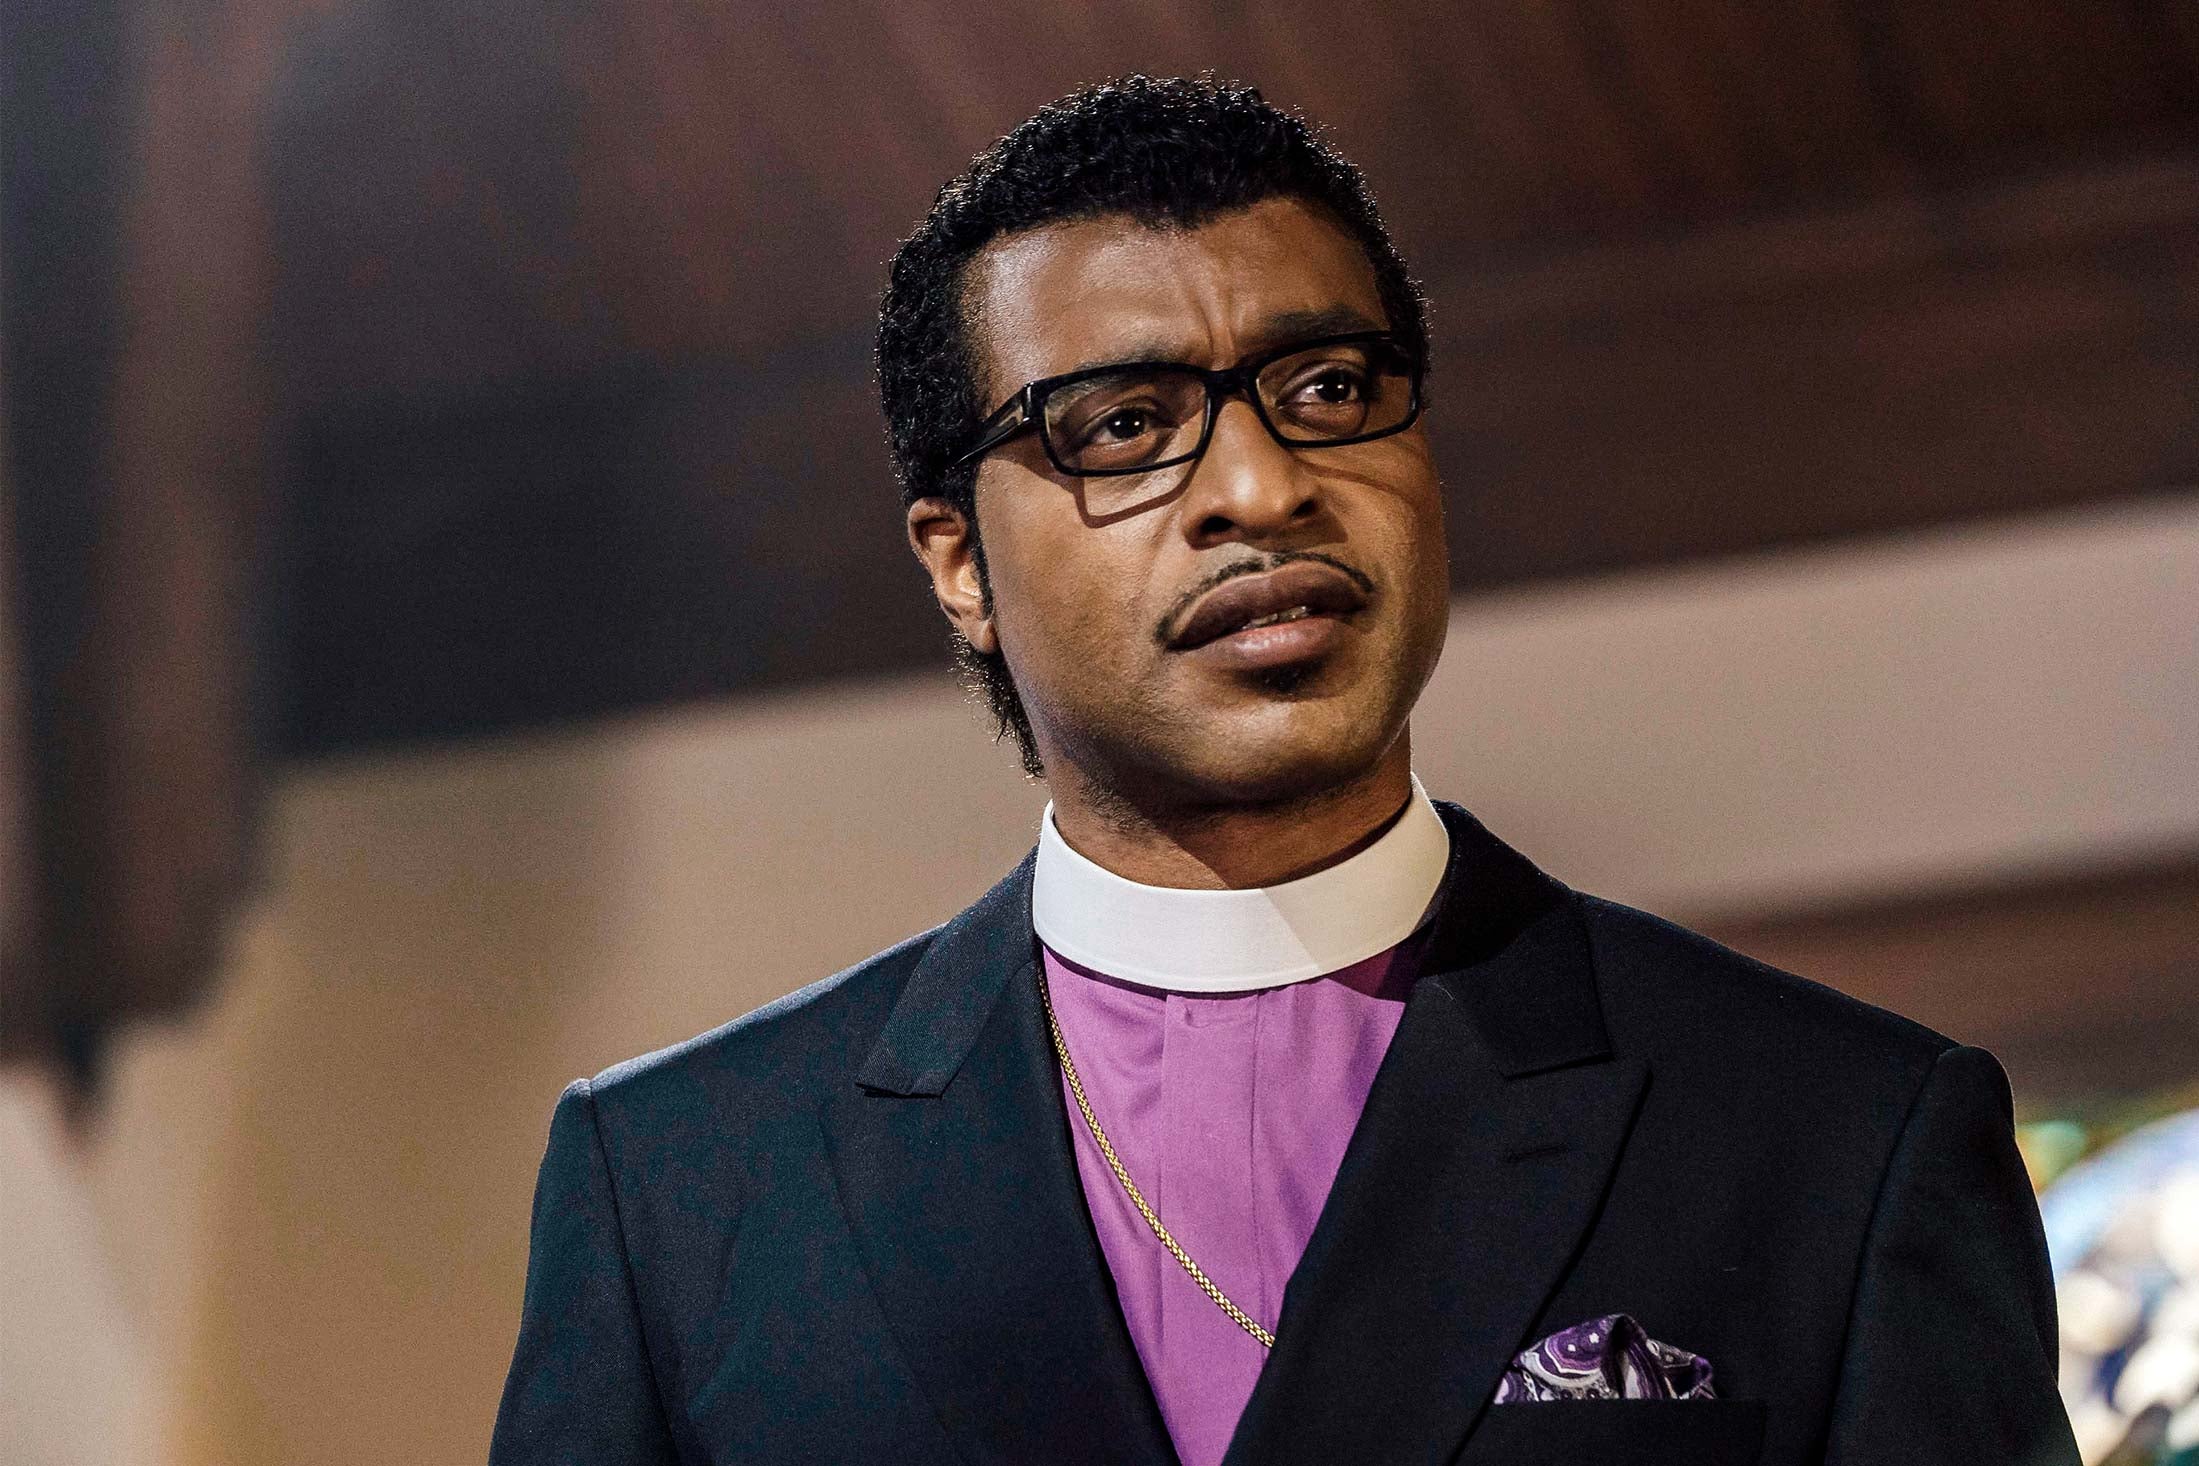 Chiwetel Ejiofor in Come Sunday.